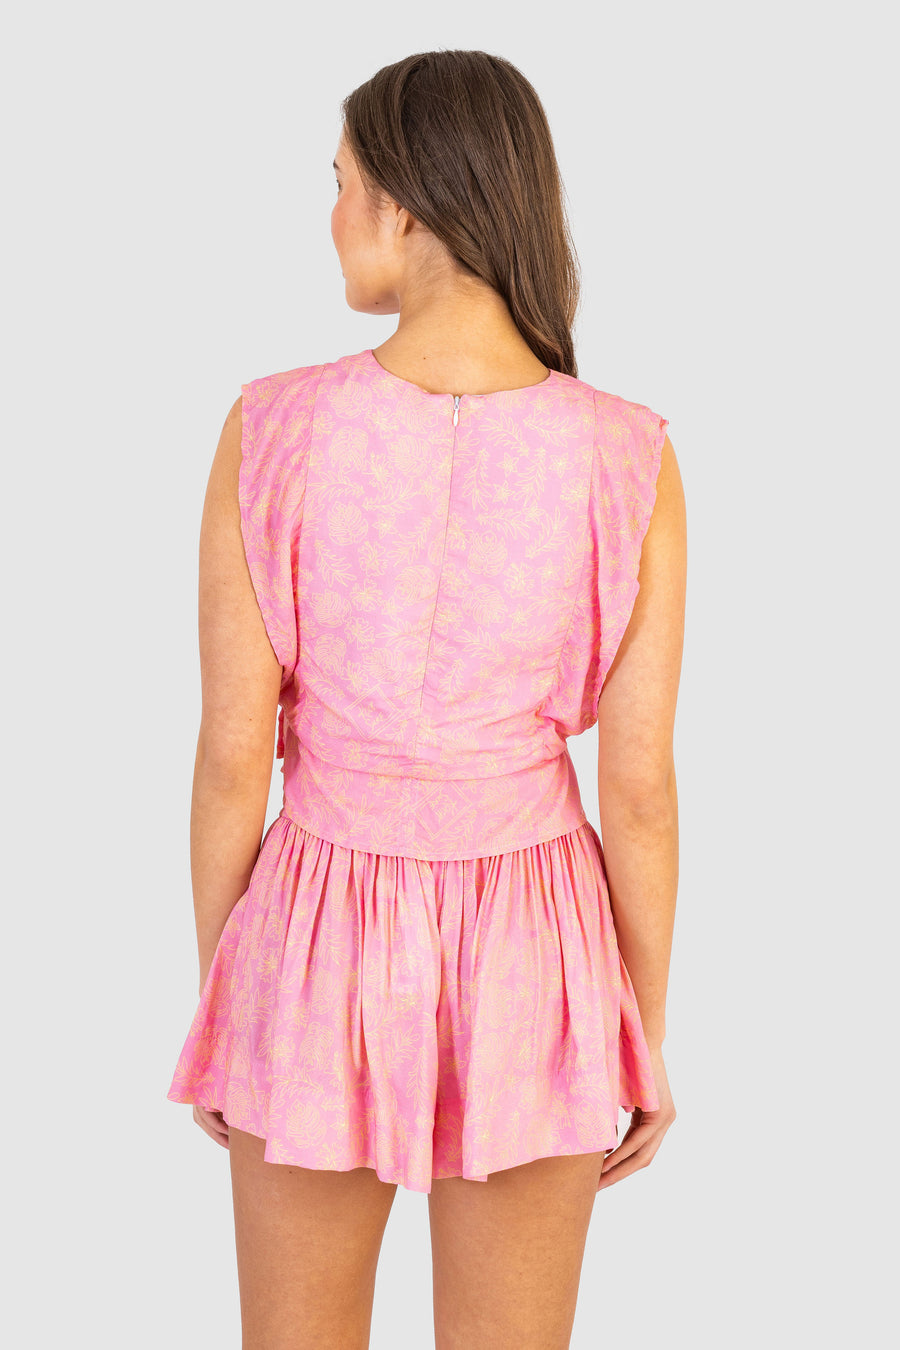 Erica Skirt Pink Surf Toile